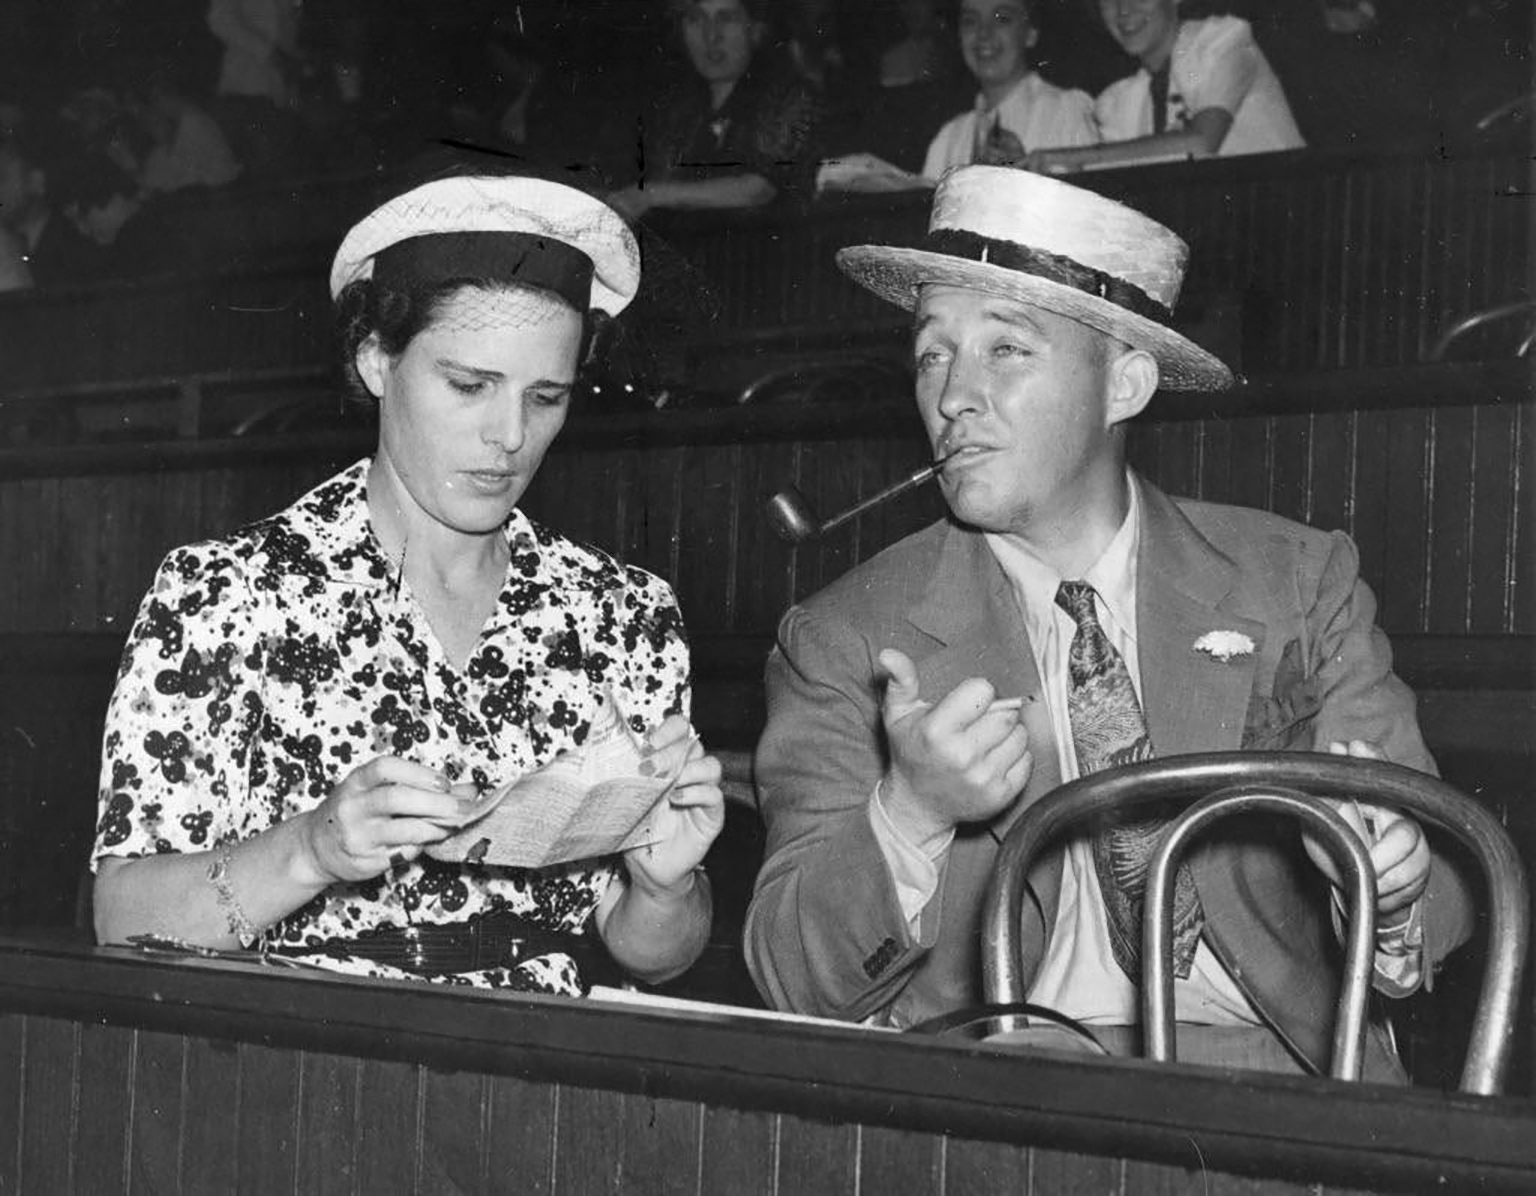 A celebrity world: Charles Howard’s wife Marcela with Bing Crosby at Santa Anita racecourse